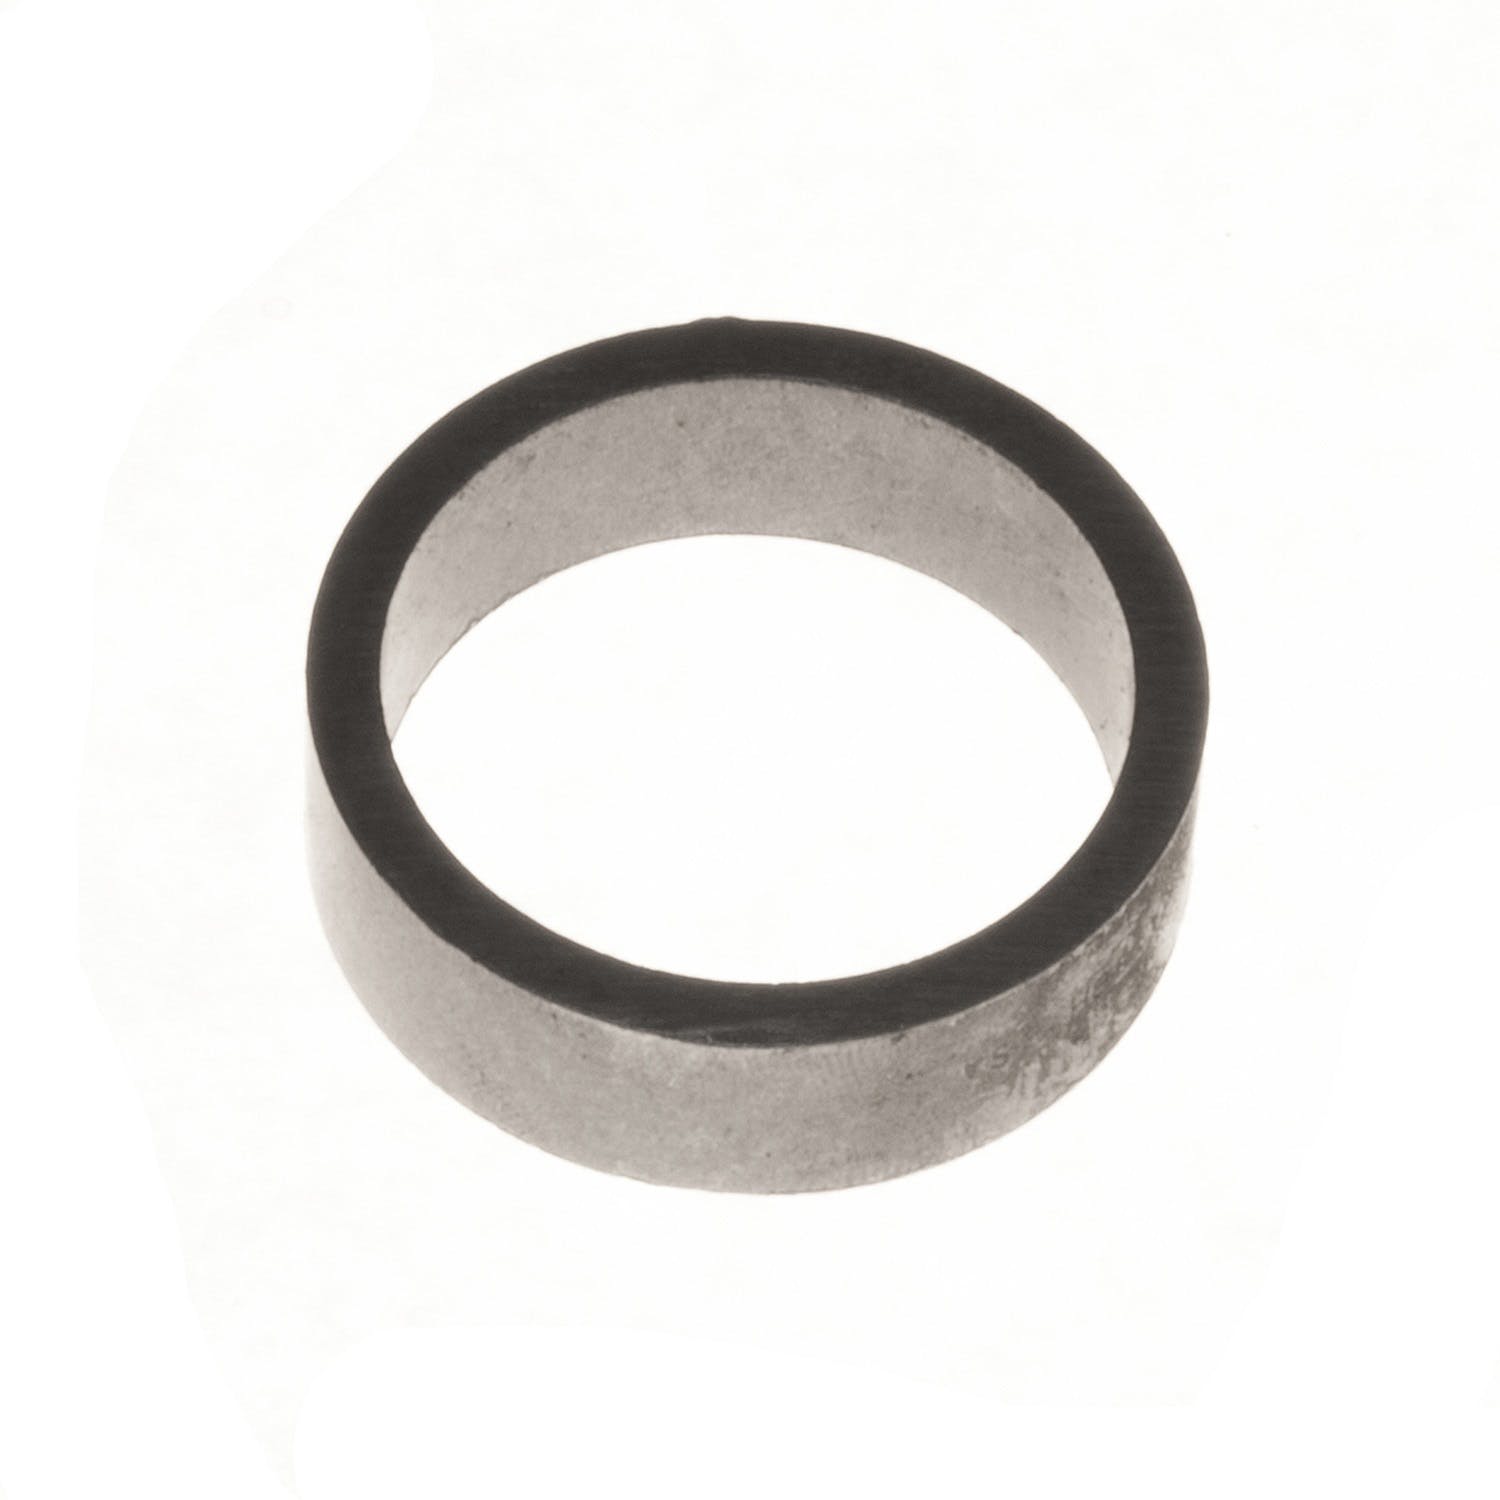 Richmond 04-0011-1 Solid Differential Spacer